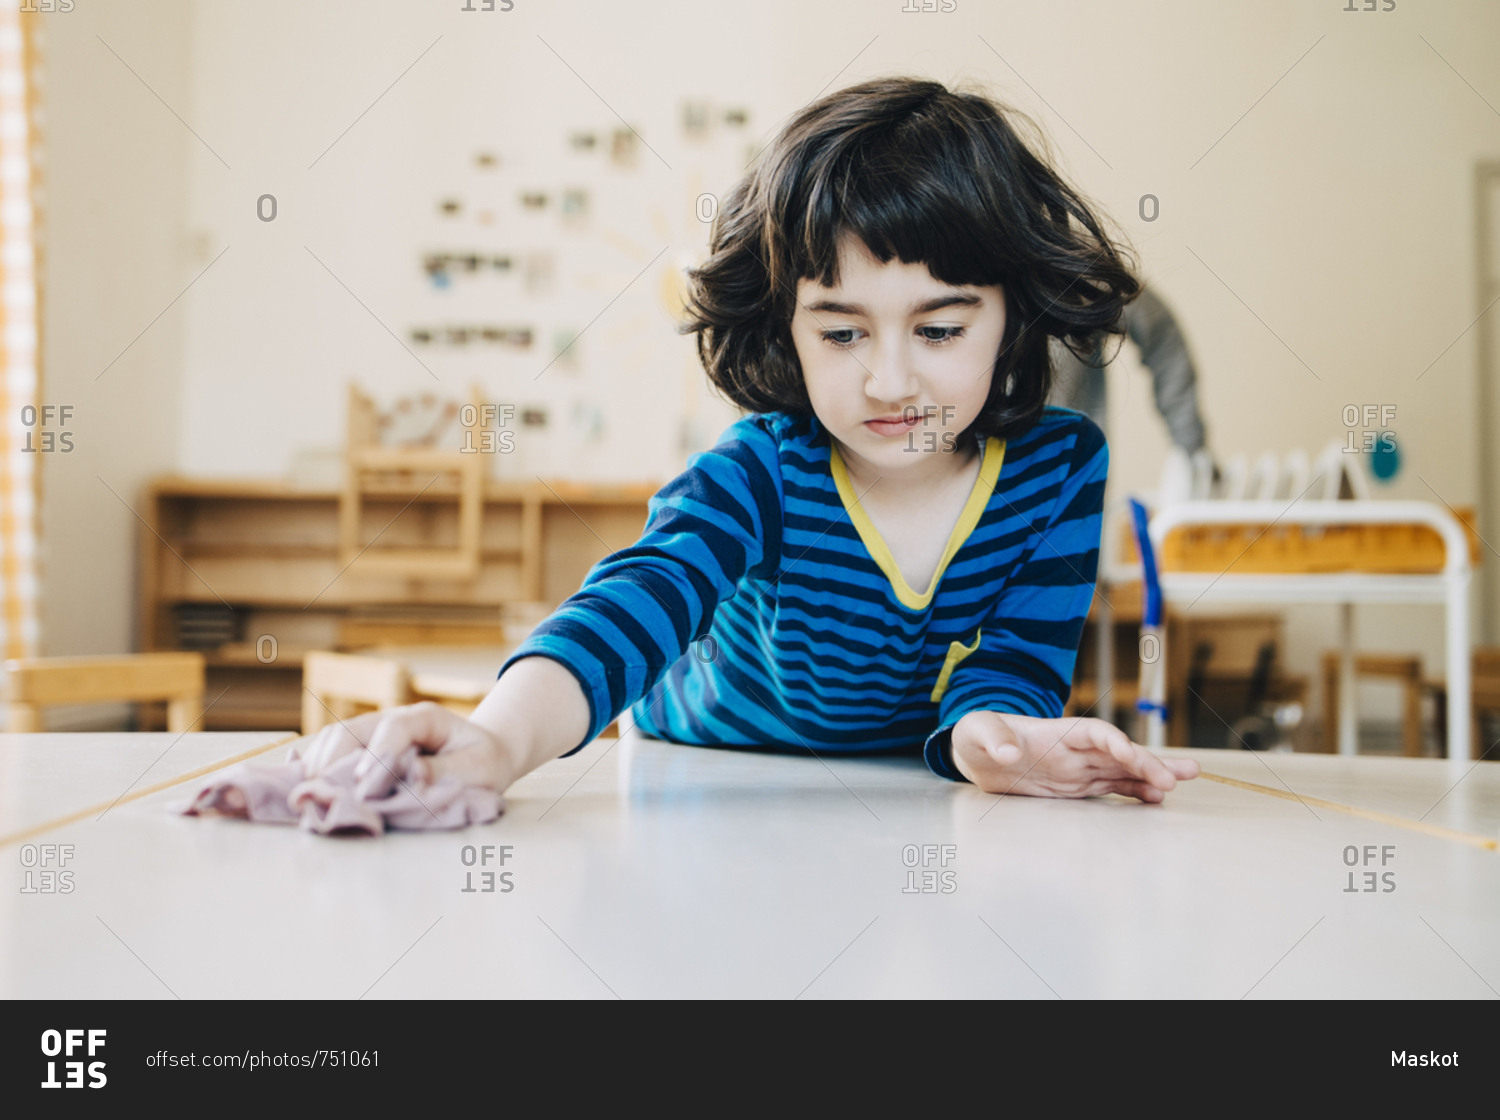 Boy cleaning table with dish cloth in child care classroom